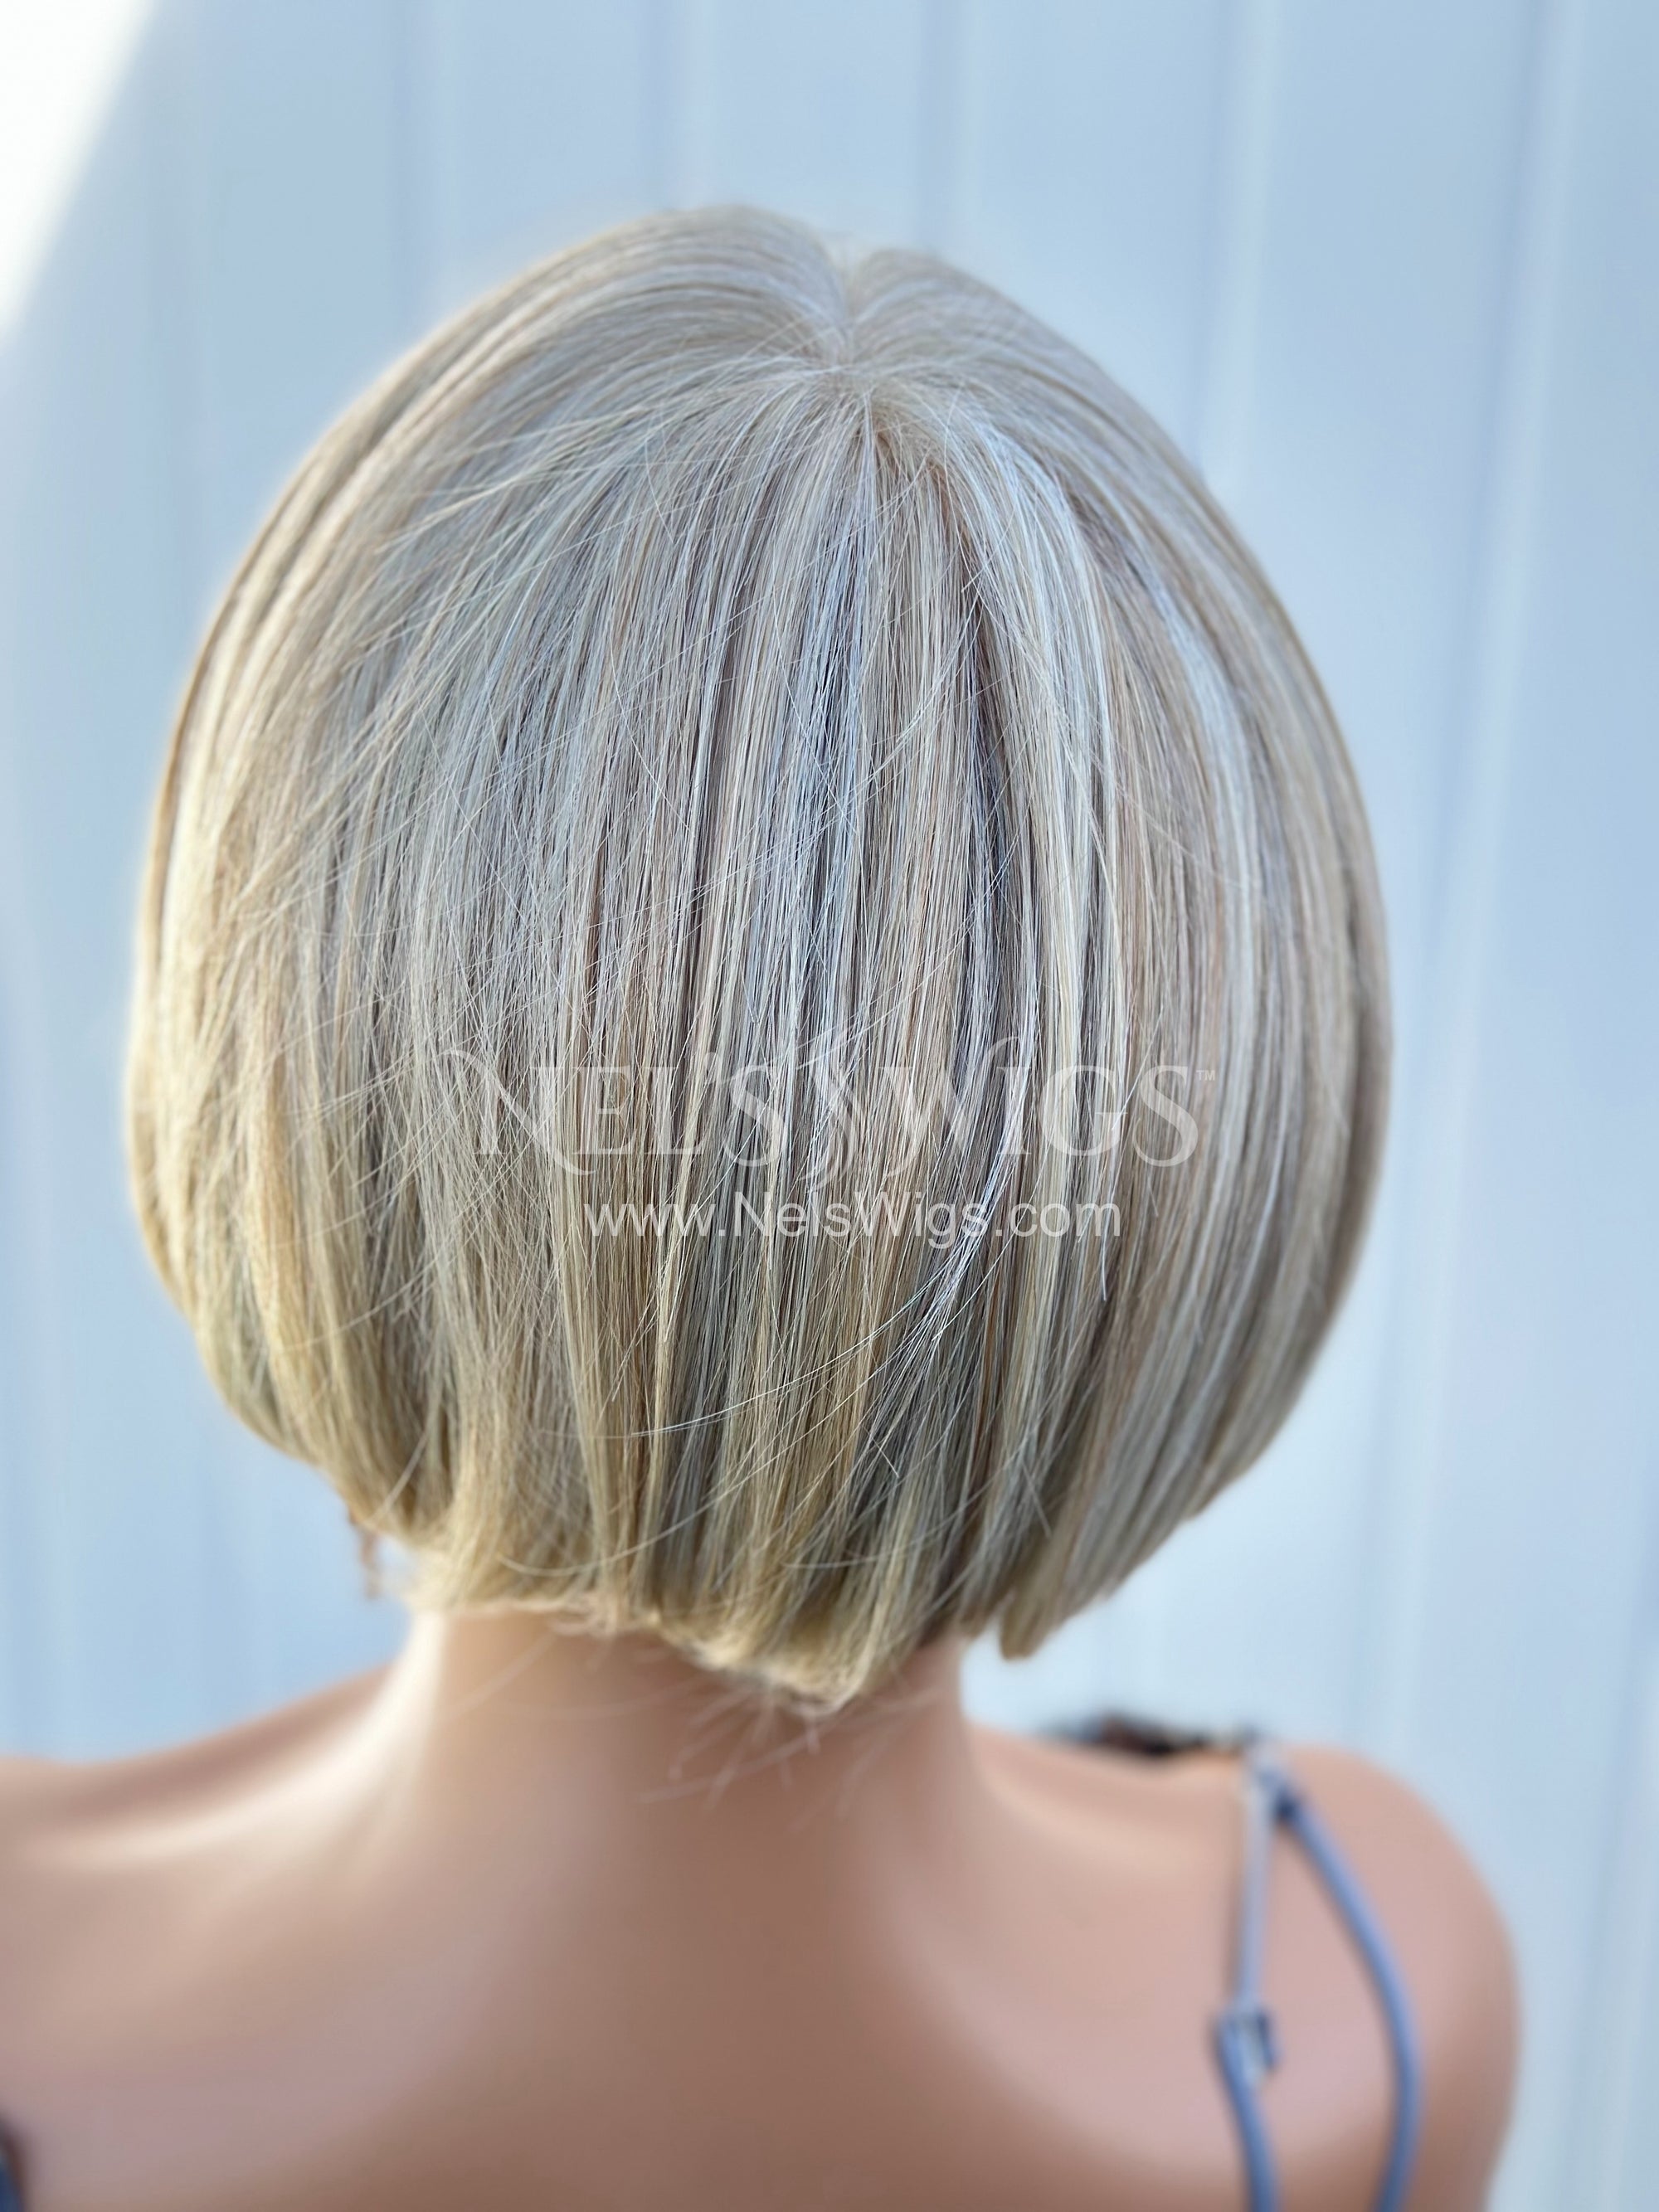 Audra - Monofilament / Cream and Icy Blonde Mix